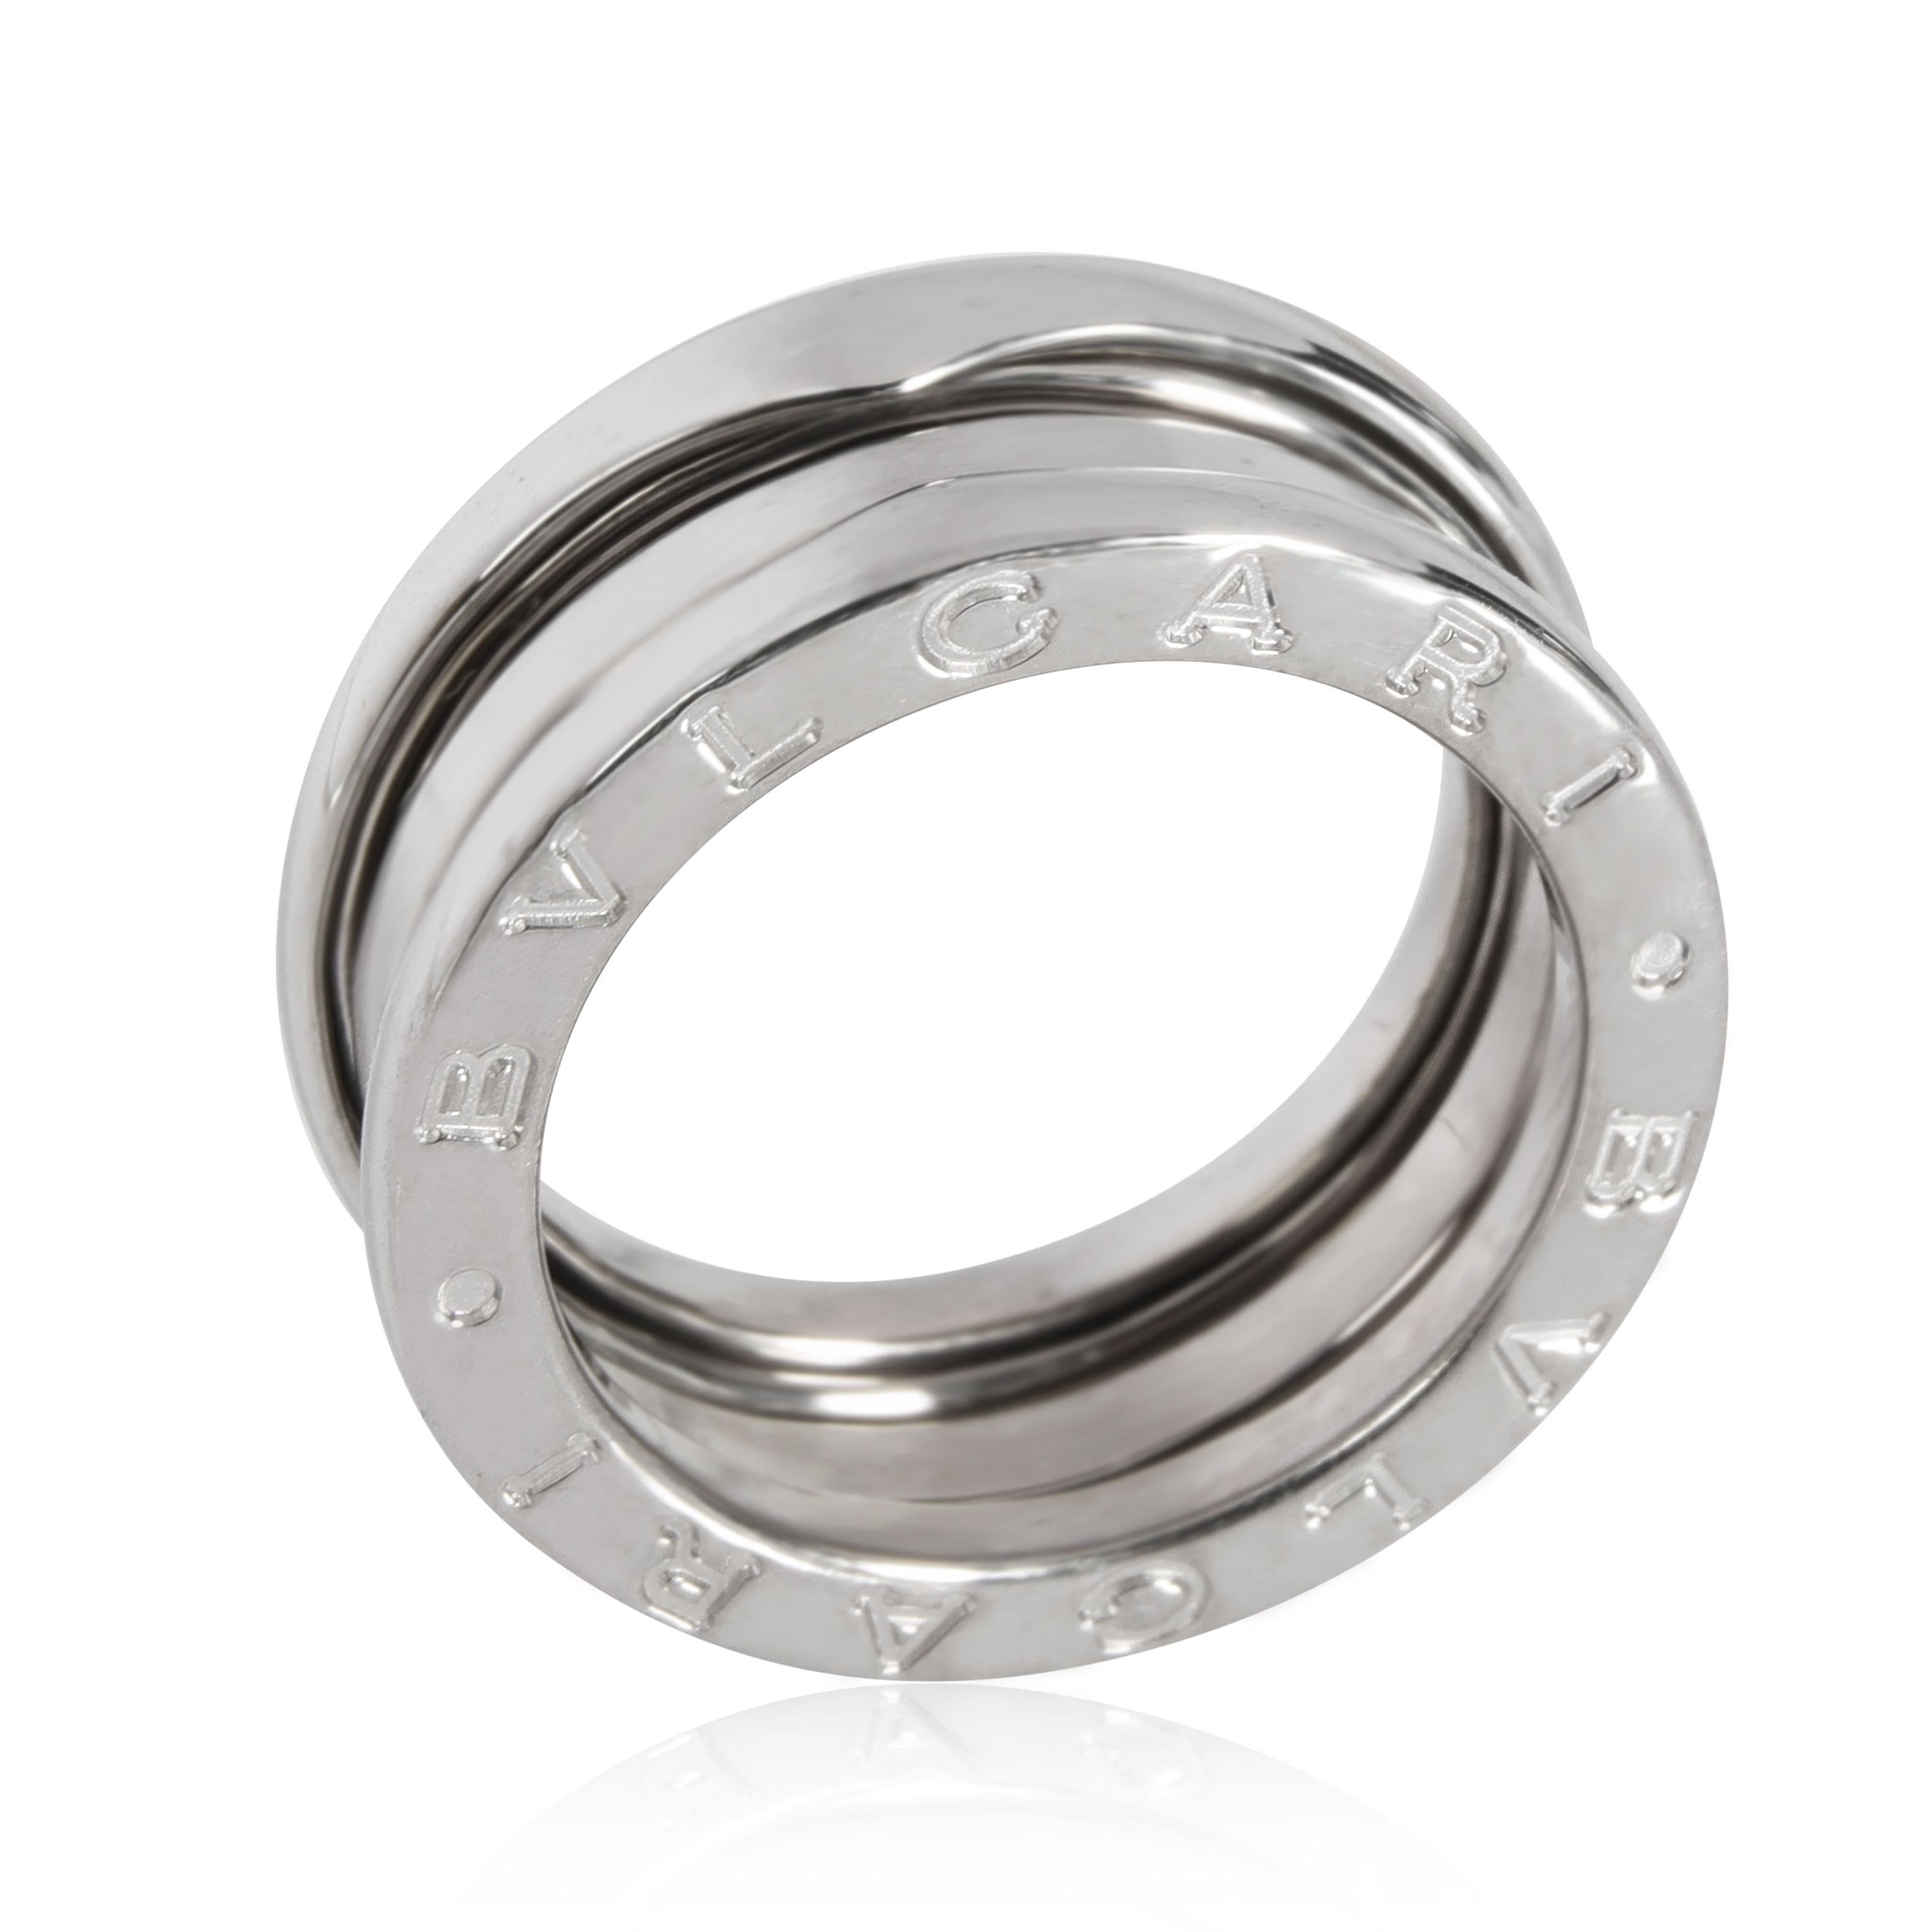 Bulgari B Zero 1 Ring in 18K White Gold

PRIMARY DETAILS
SKU: 112422
Listing Title: Bulgari B Zero 1 Ring in 18K White Gold
Condition Description: Retails for 2330 USD. In excellent condition and recently polished. Ring size is 50.
Brand: